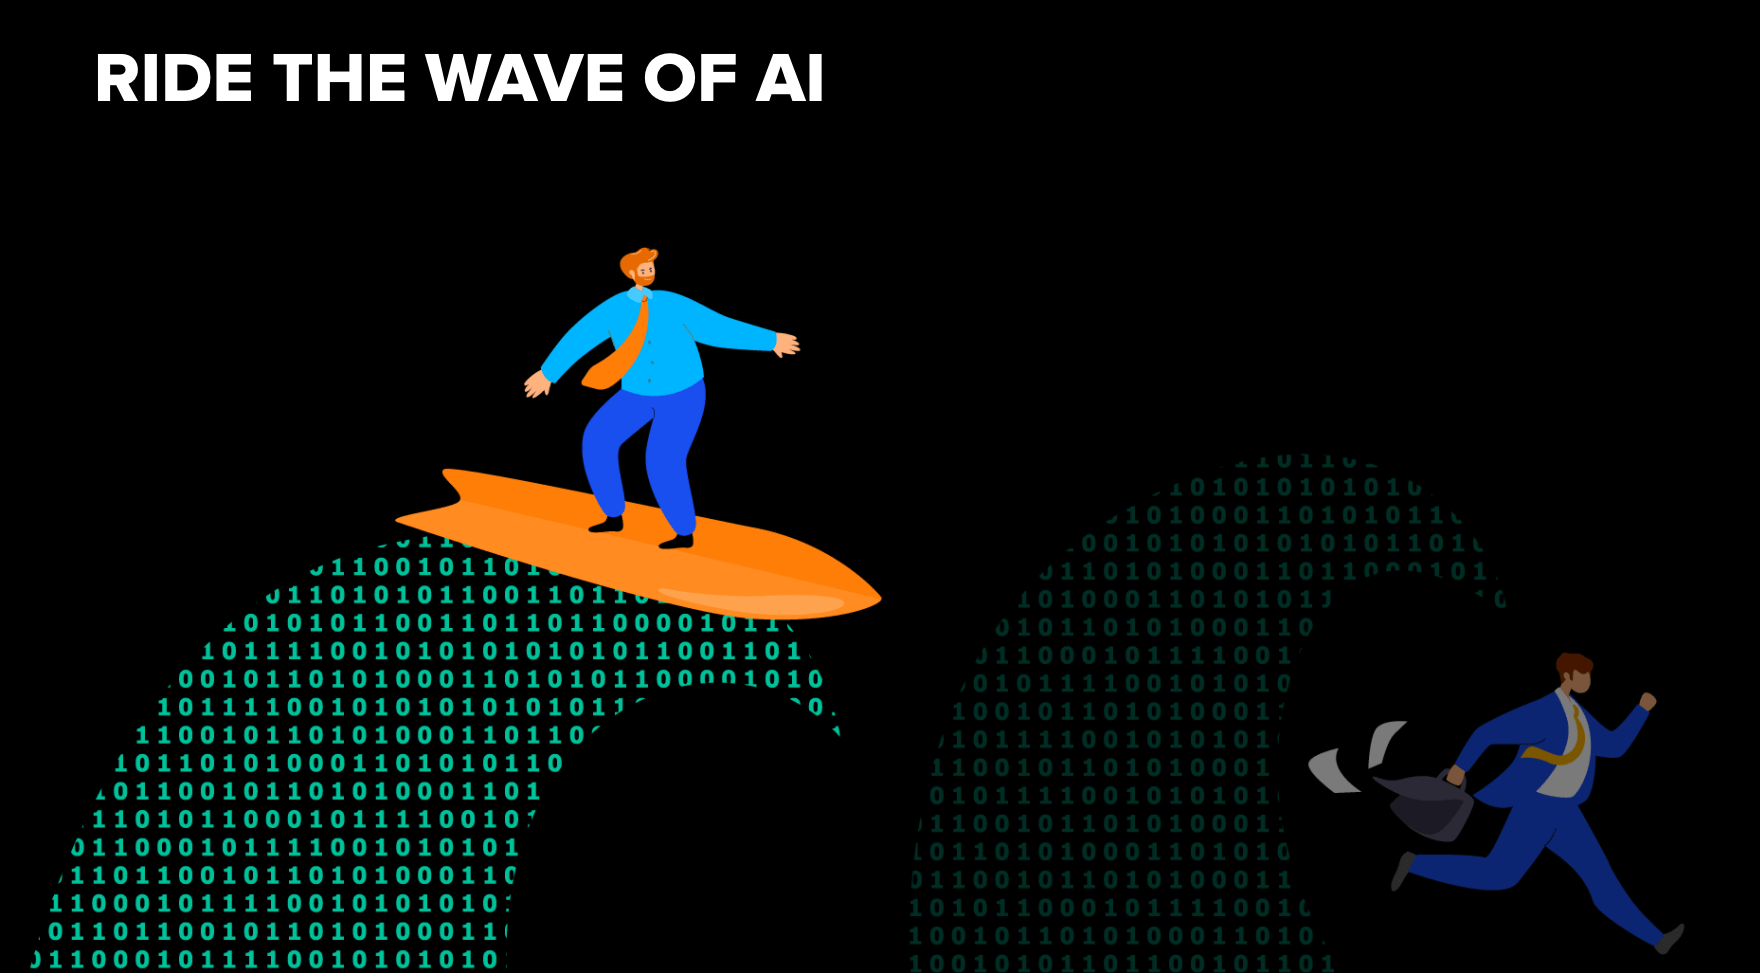 Ride the wave of AI